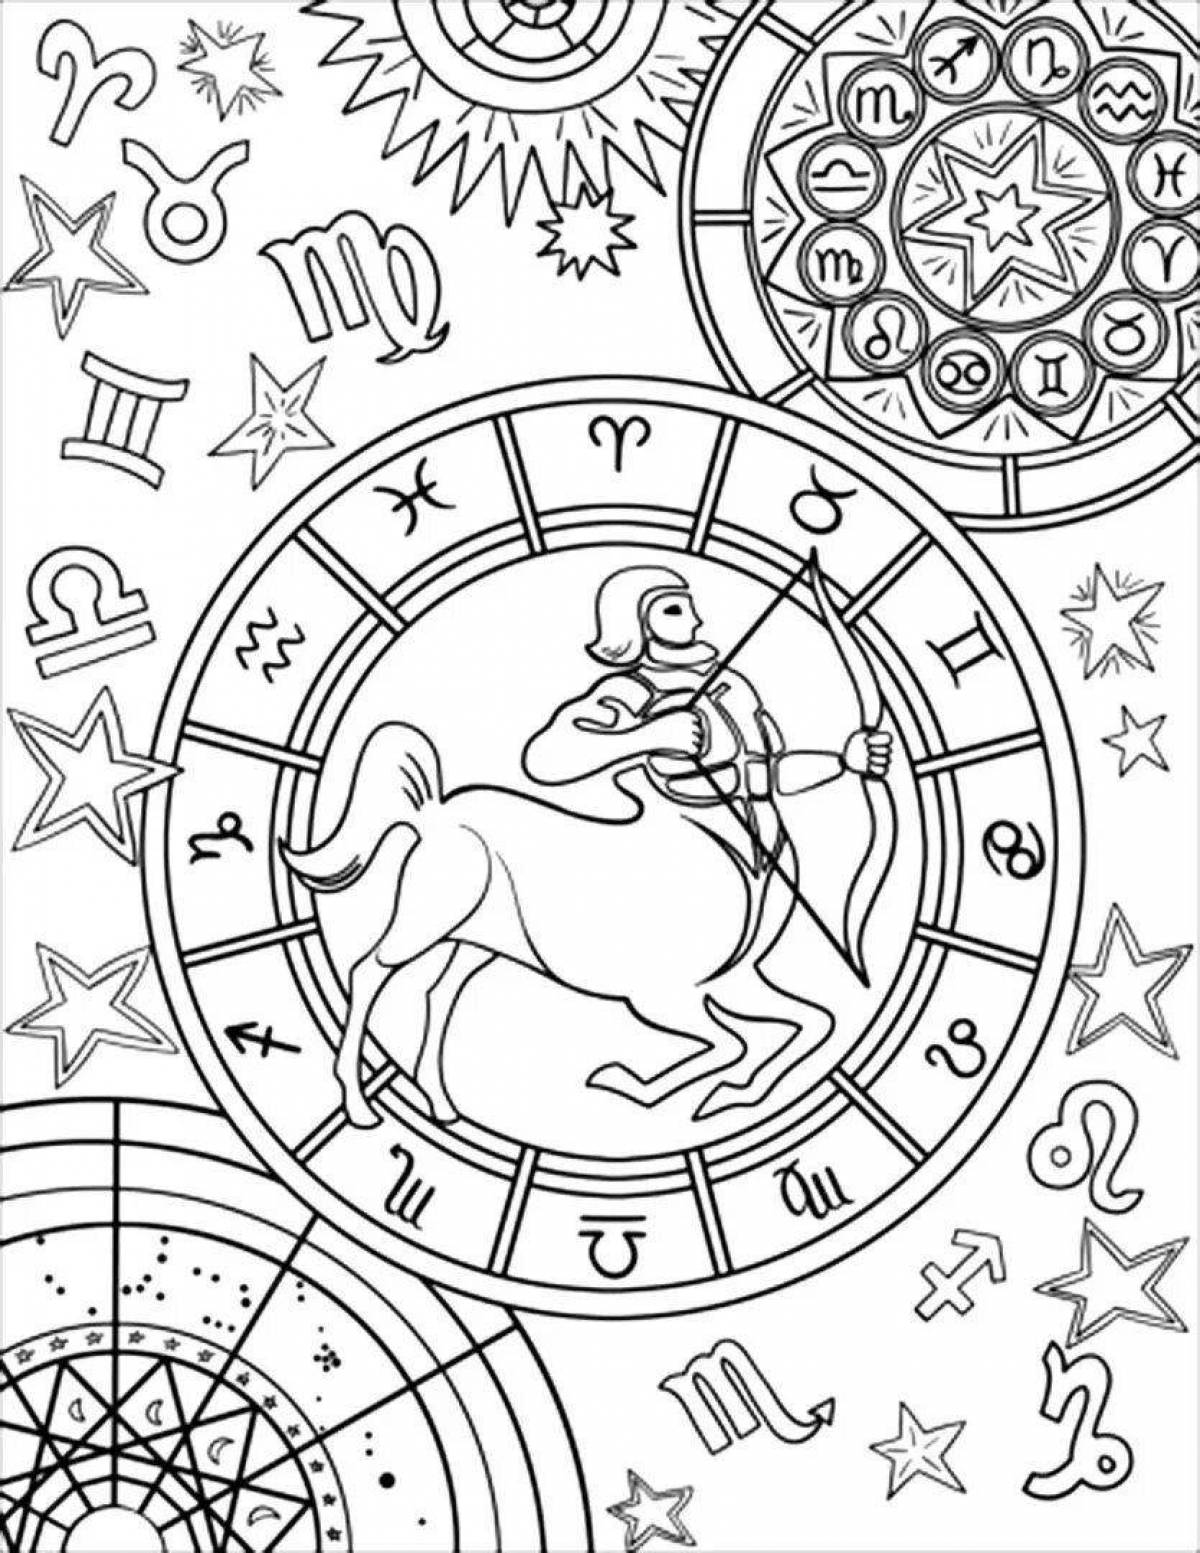 Attractive archer coloring page